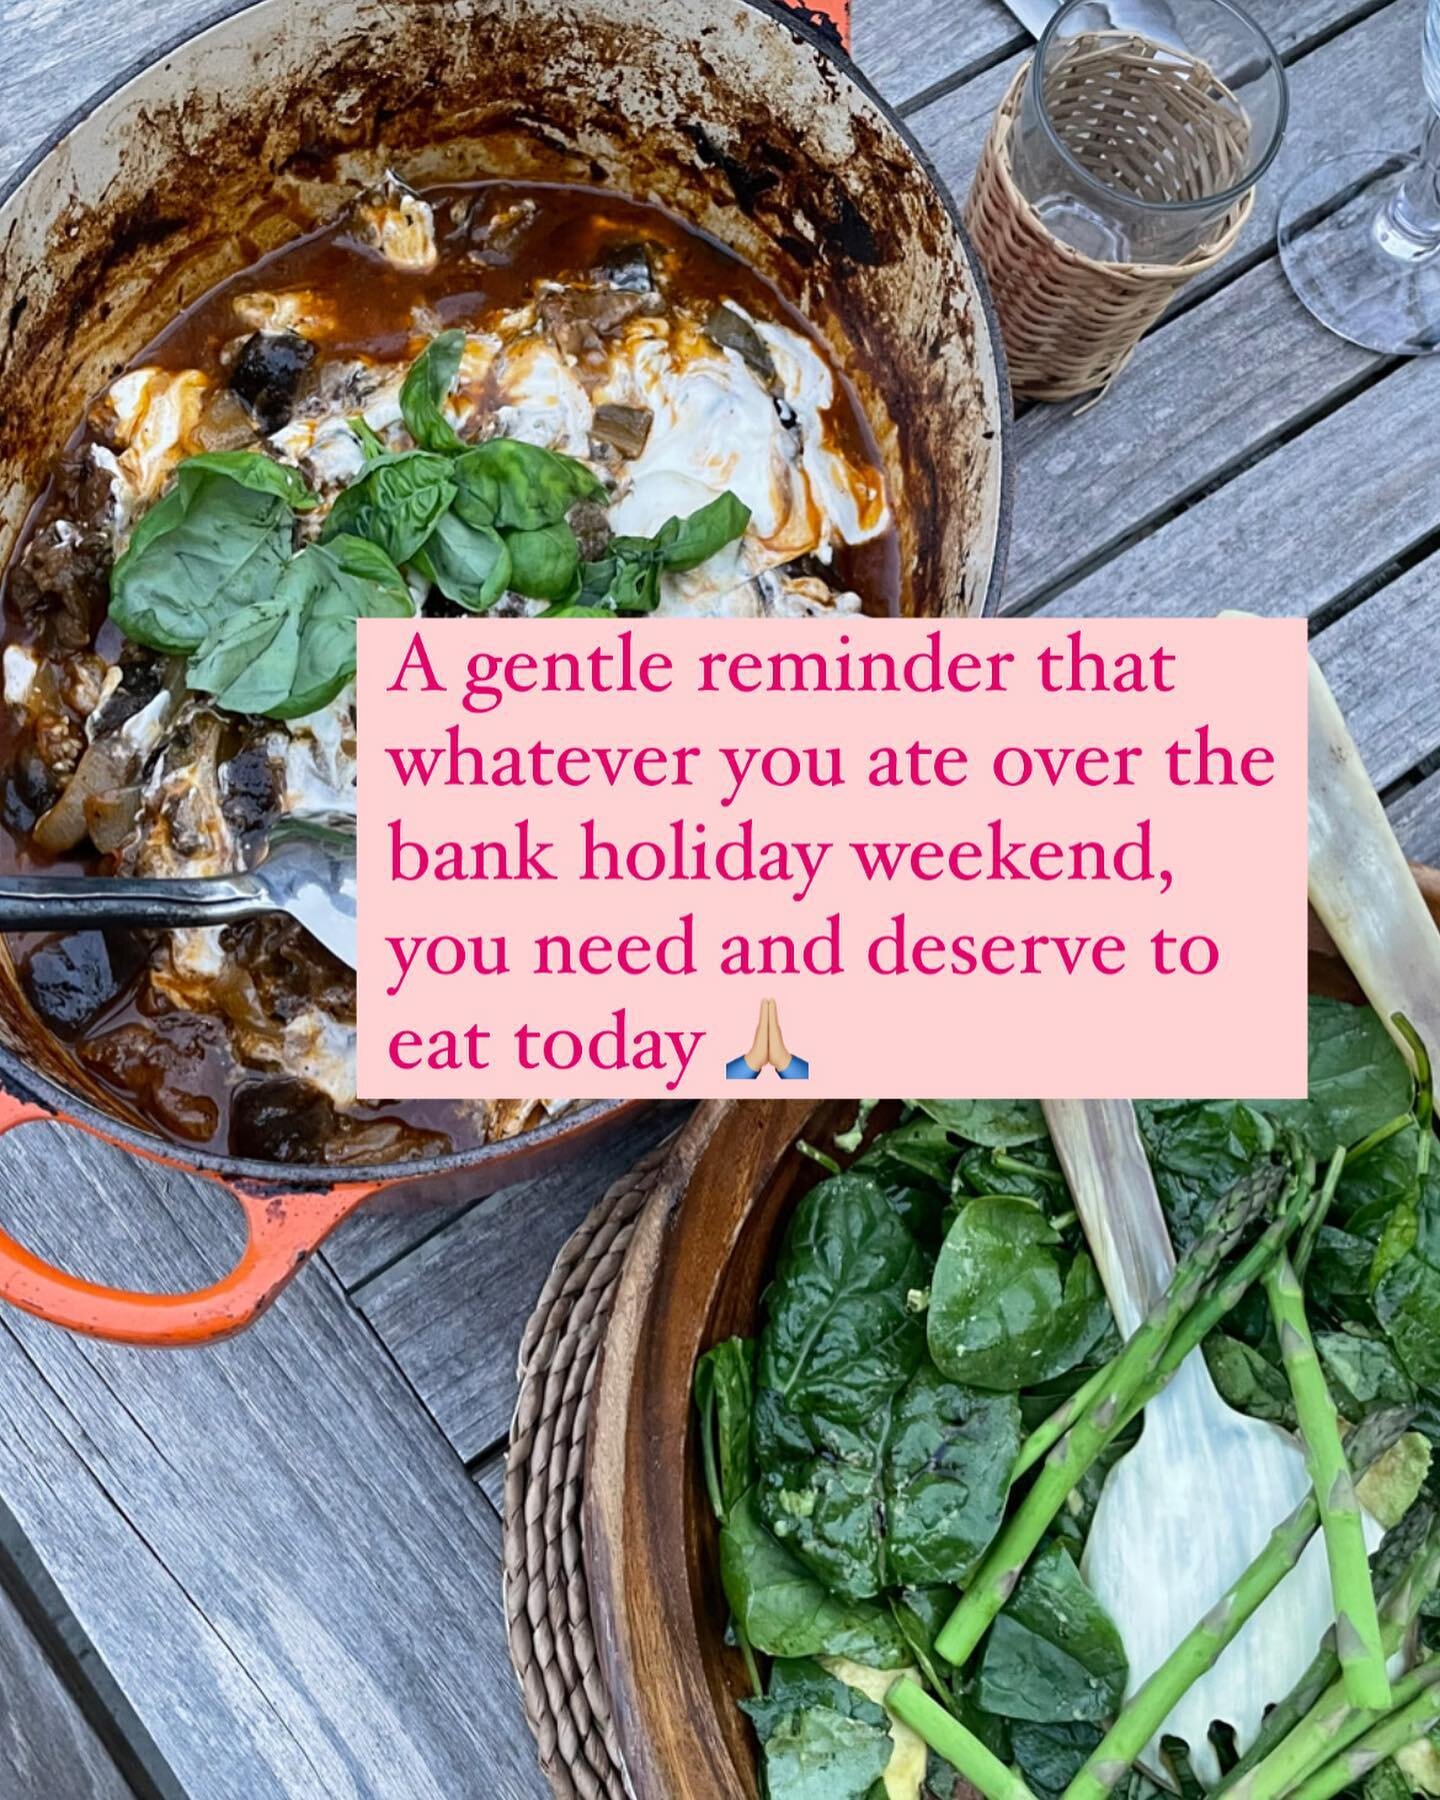 Post bank holiday reminders ☝🏼
.

❤️ Want more support? ❤️
.
🤓 Our team of registered nutritionists and dietitians specialise in weight inclusive approaches to eating disorder recovery, disordered eating intuitive eating and healing from chronic di